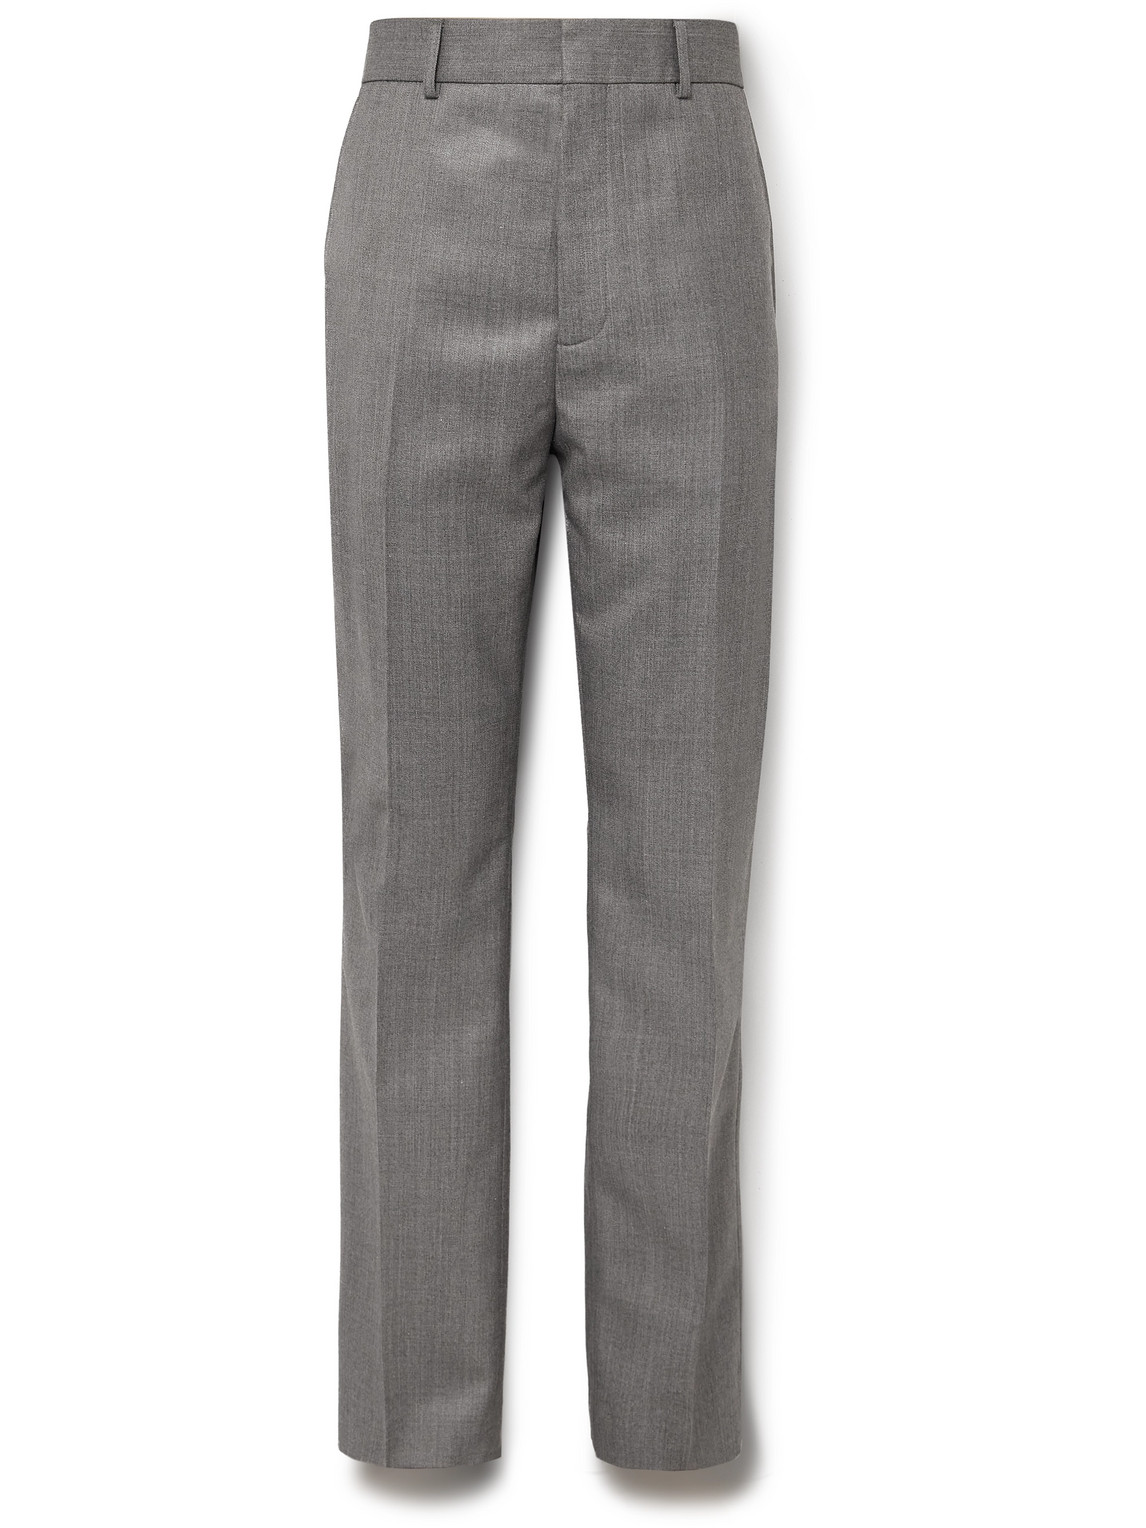 Philly Slim-Fit Straight-Leg Woven Trousers